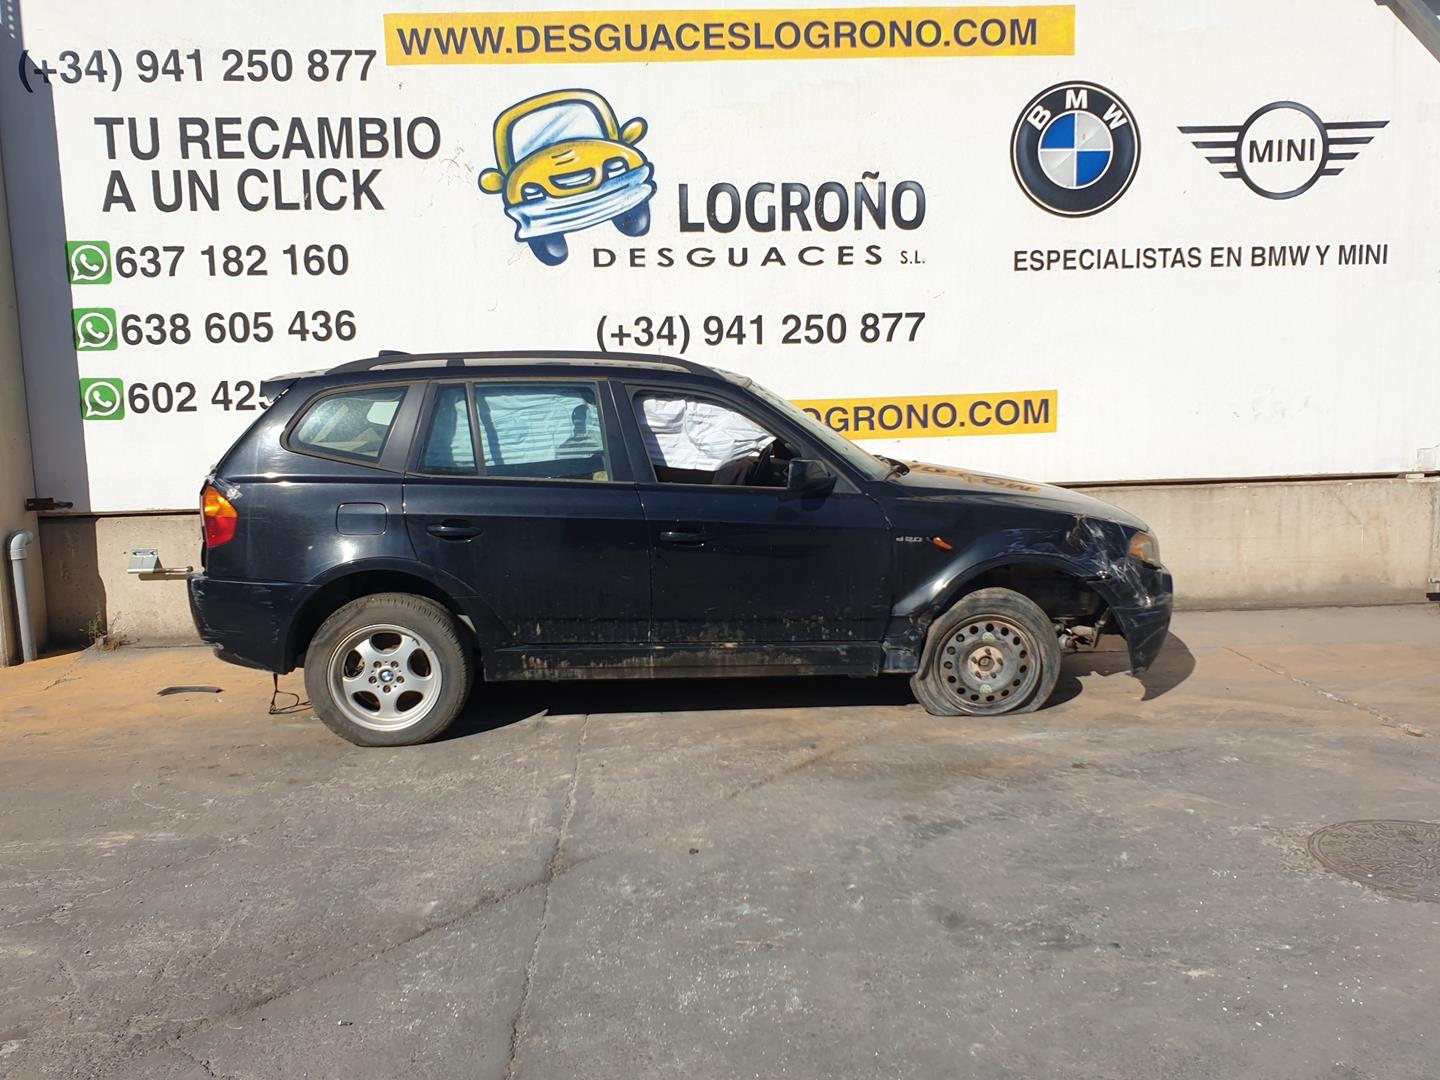 BMW X3 E83 (2003-2010) Other Body Parts 51243400379, 51243400379 19830705